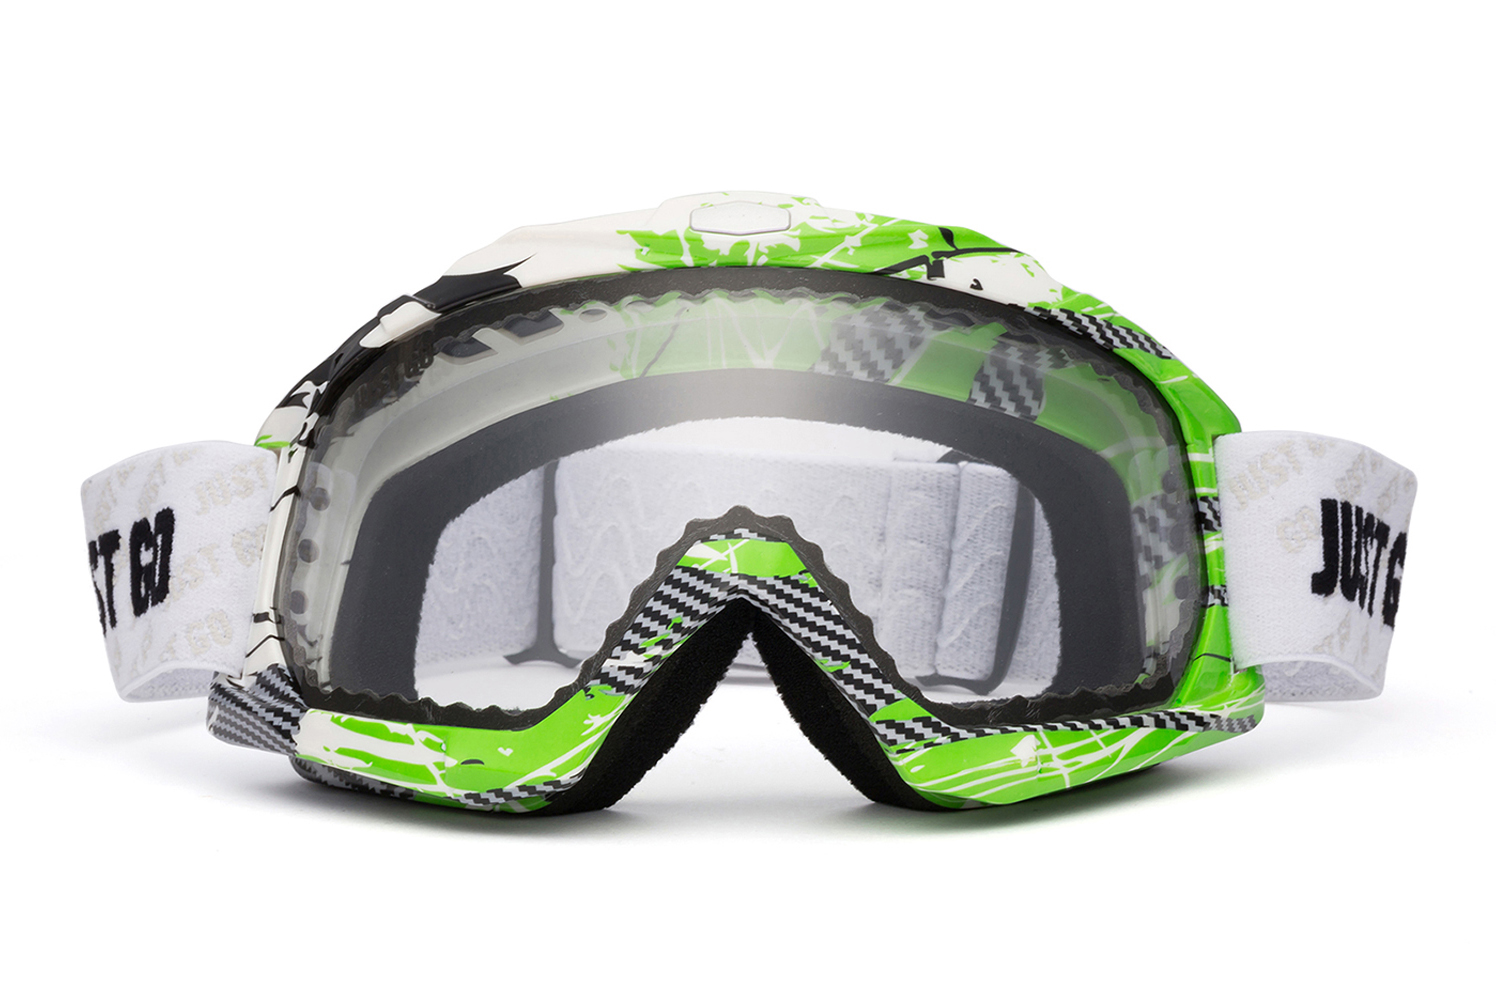 JUST GO Ski Goggles for Skiing Motorcycling and Winter Sports Dual-Layer Anti-Fog 100% UV Protection lens Snowboard Goggles fit Men, Women and Youth, Green and White Frame/ Clear Lens (VLT 81.2%) - image 1 of 9